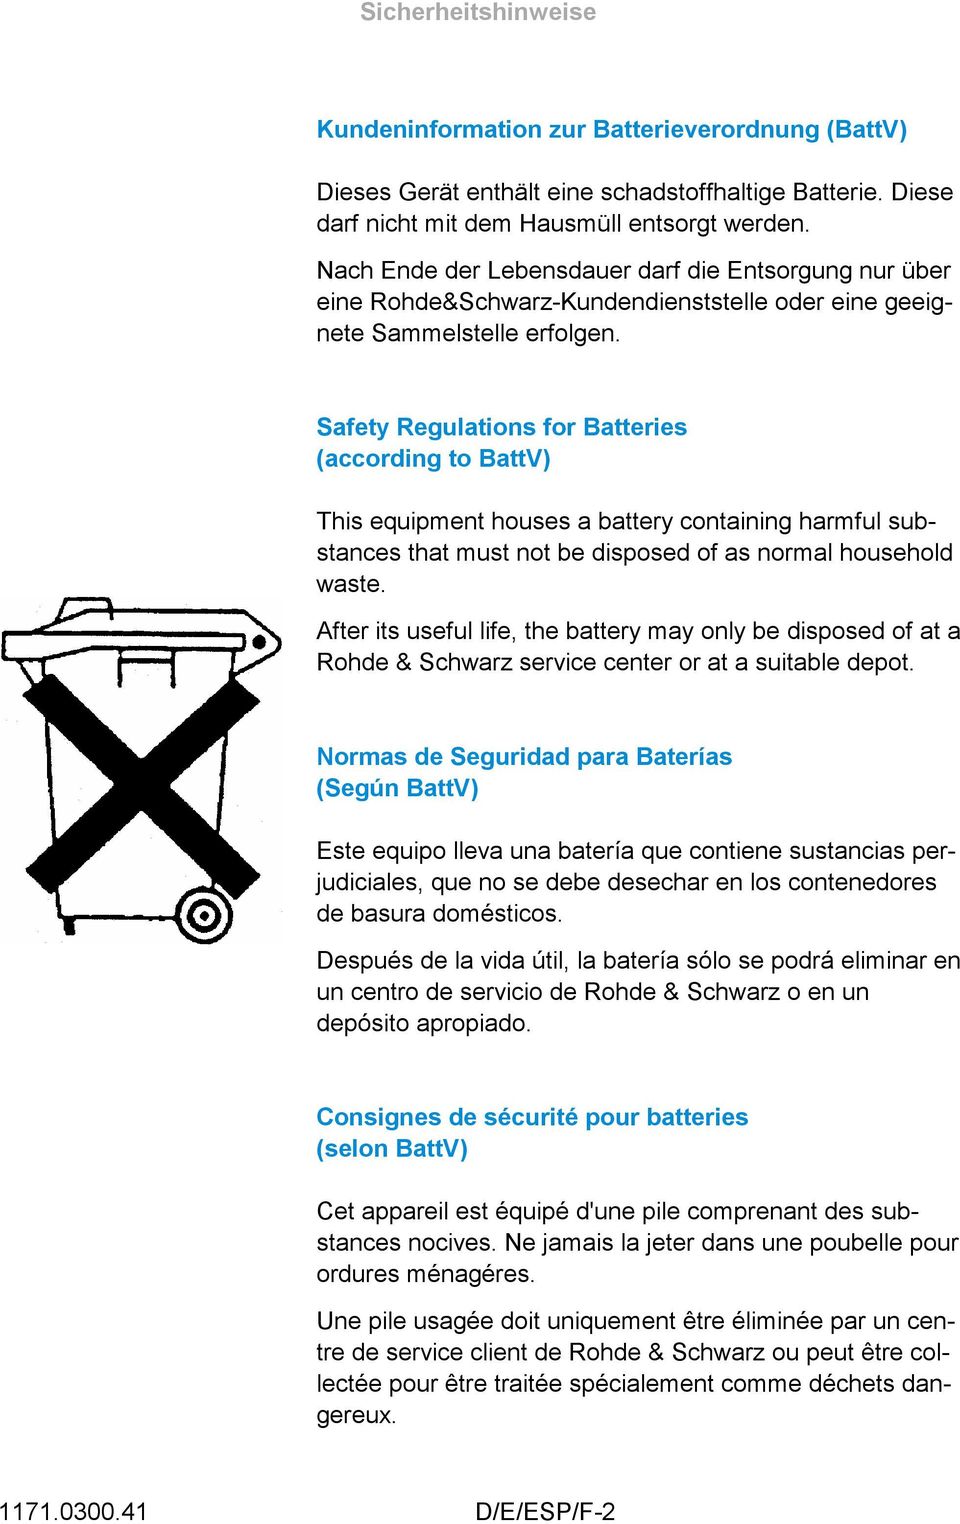 Safety Regulations for Batteries (according to BattV) This equipment houses a battery containing harmful substances that must not be disposed of as normal household waste.